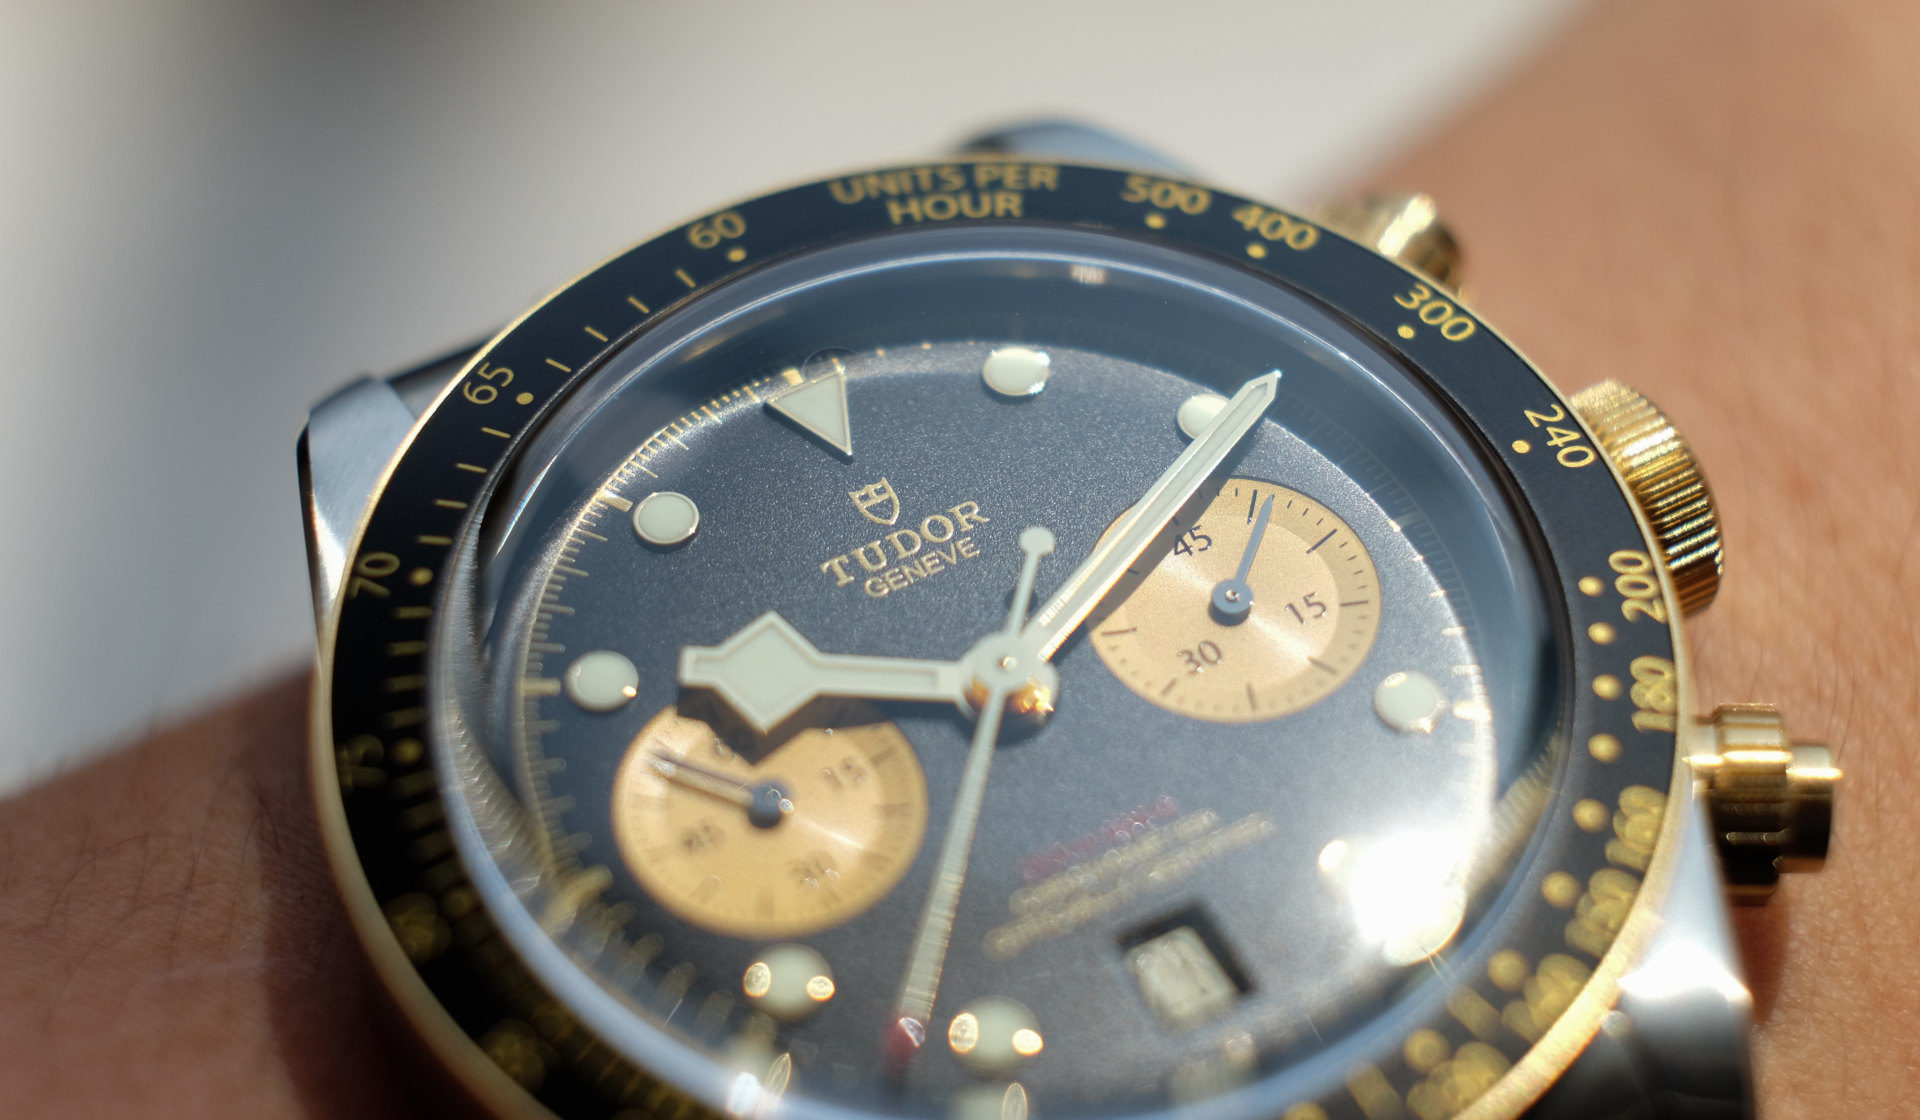 Half sporty, half dressy the Tudor Black Bay Chrono S&G is a watch for all occasions